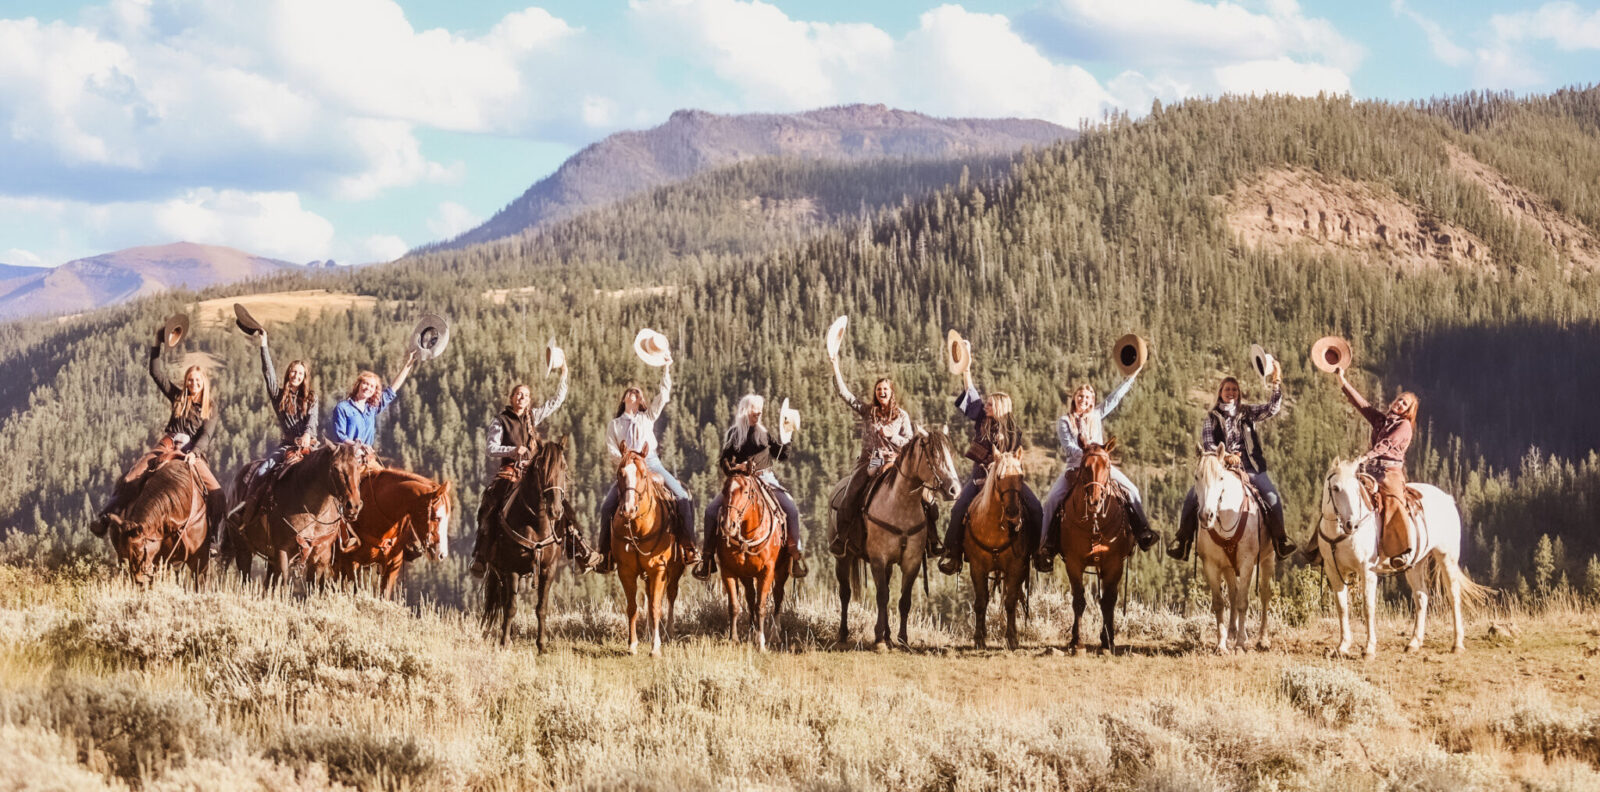 A group of cowgirls on horses hold their hats in the air in celebration with a lovely mountain scene as the backdrop.